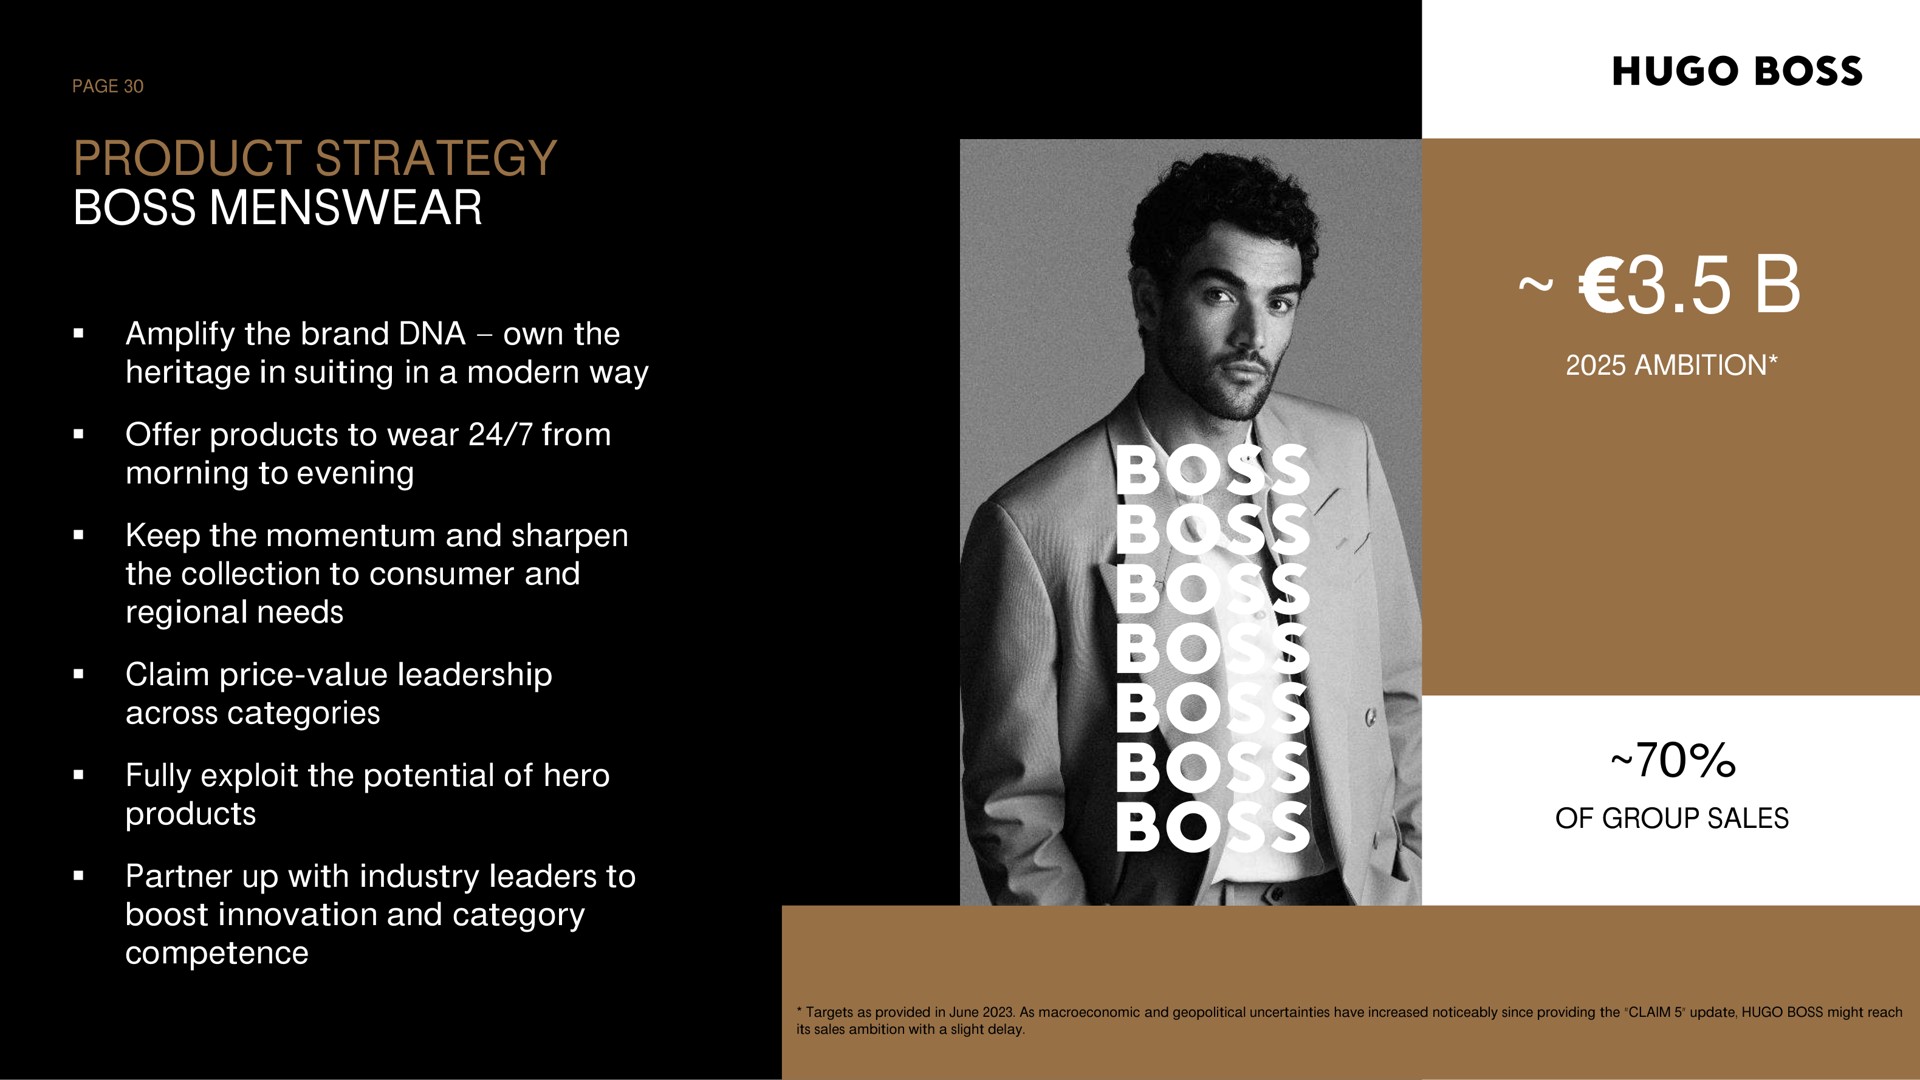 product strategy boss heritage in suiting in a modern way claim price value leadership across categories competence products of group sales | Hugo Boss